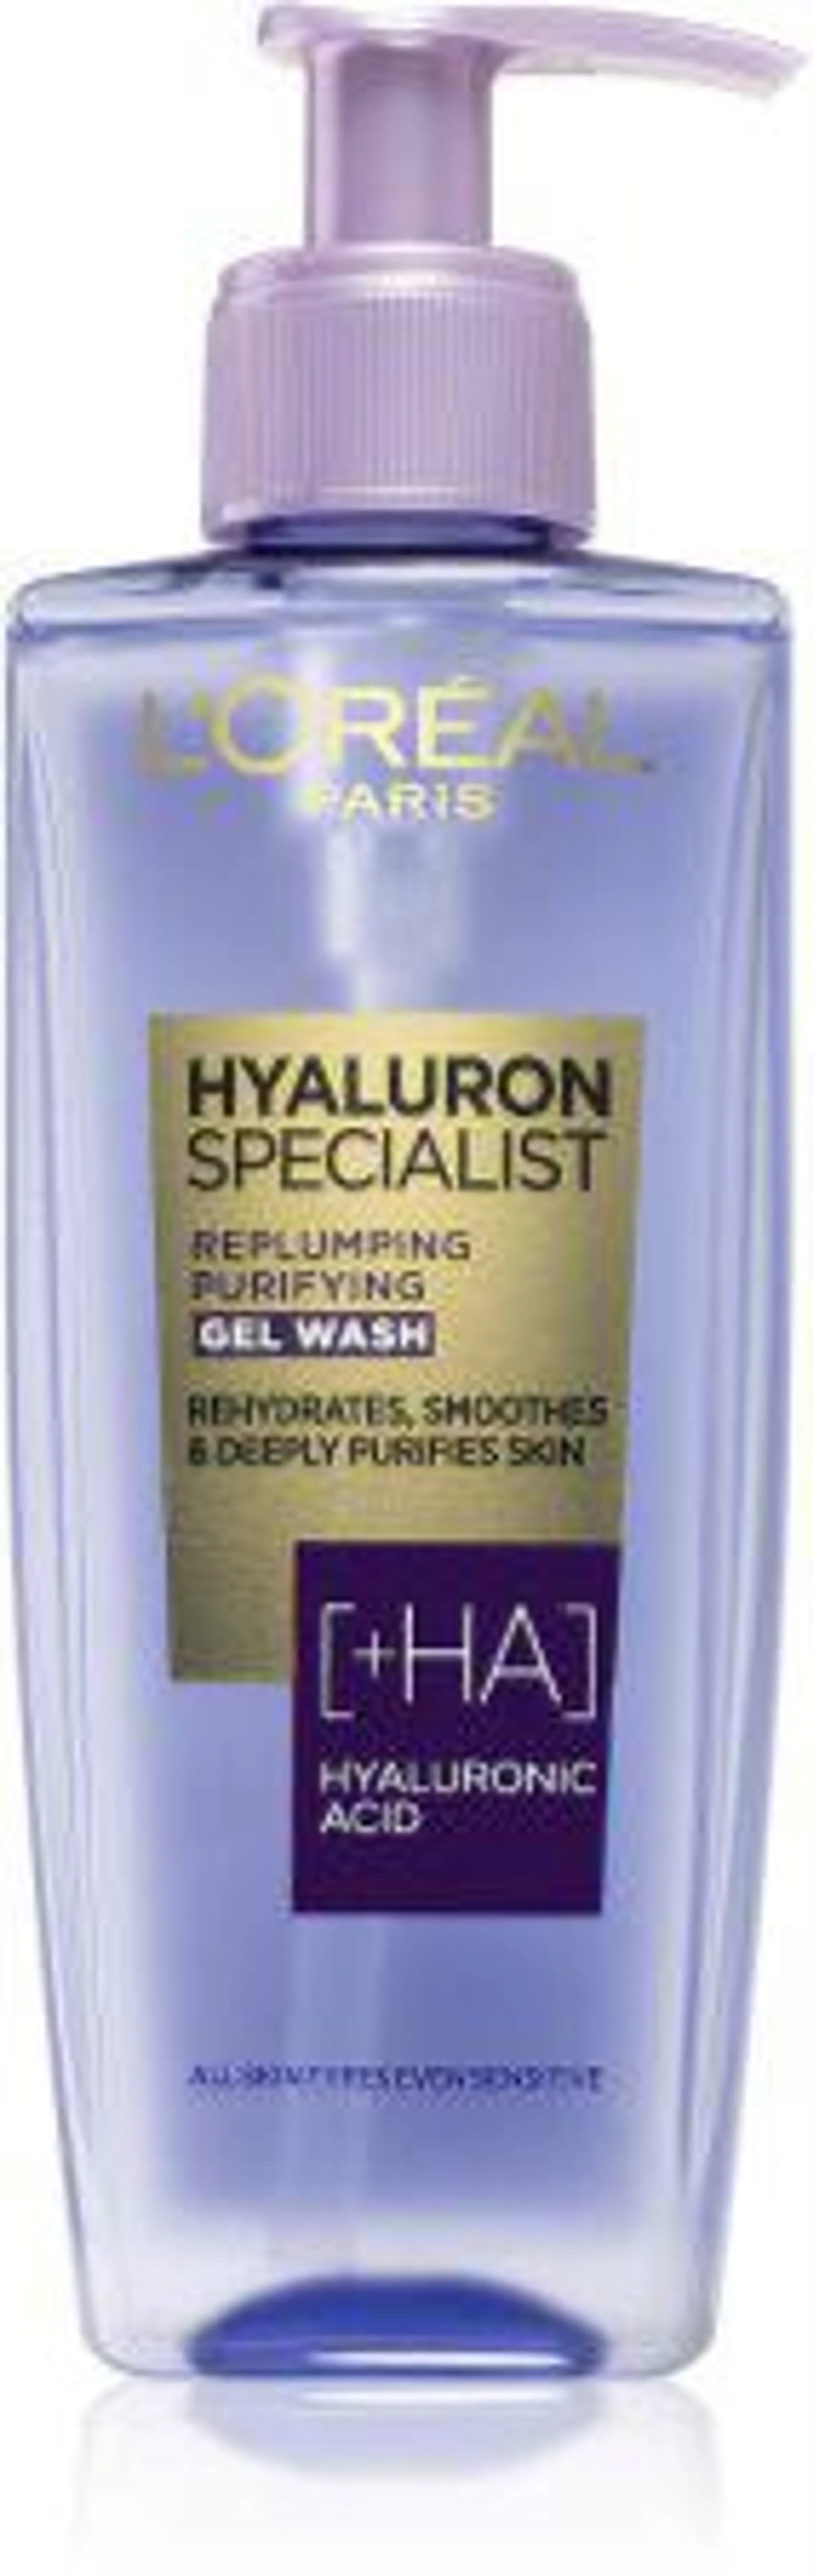 Cleansing Gel with hyaluronic acid